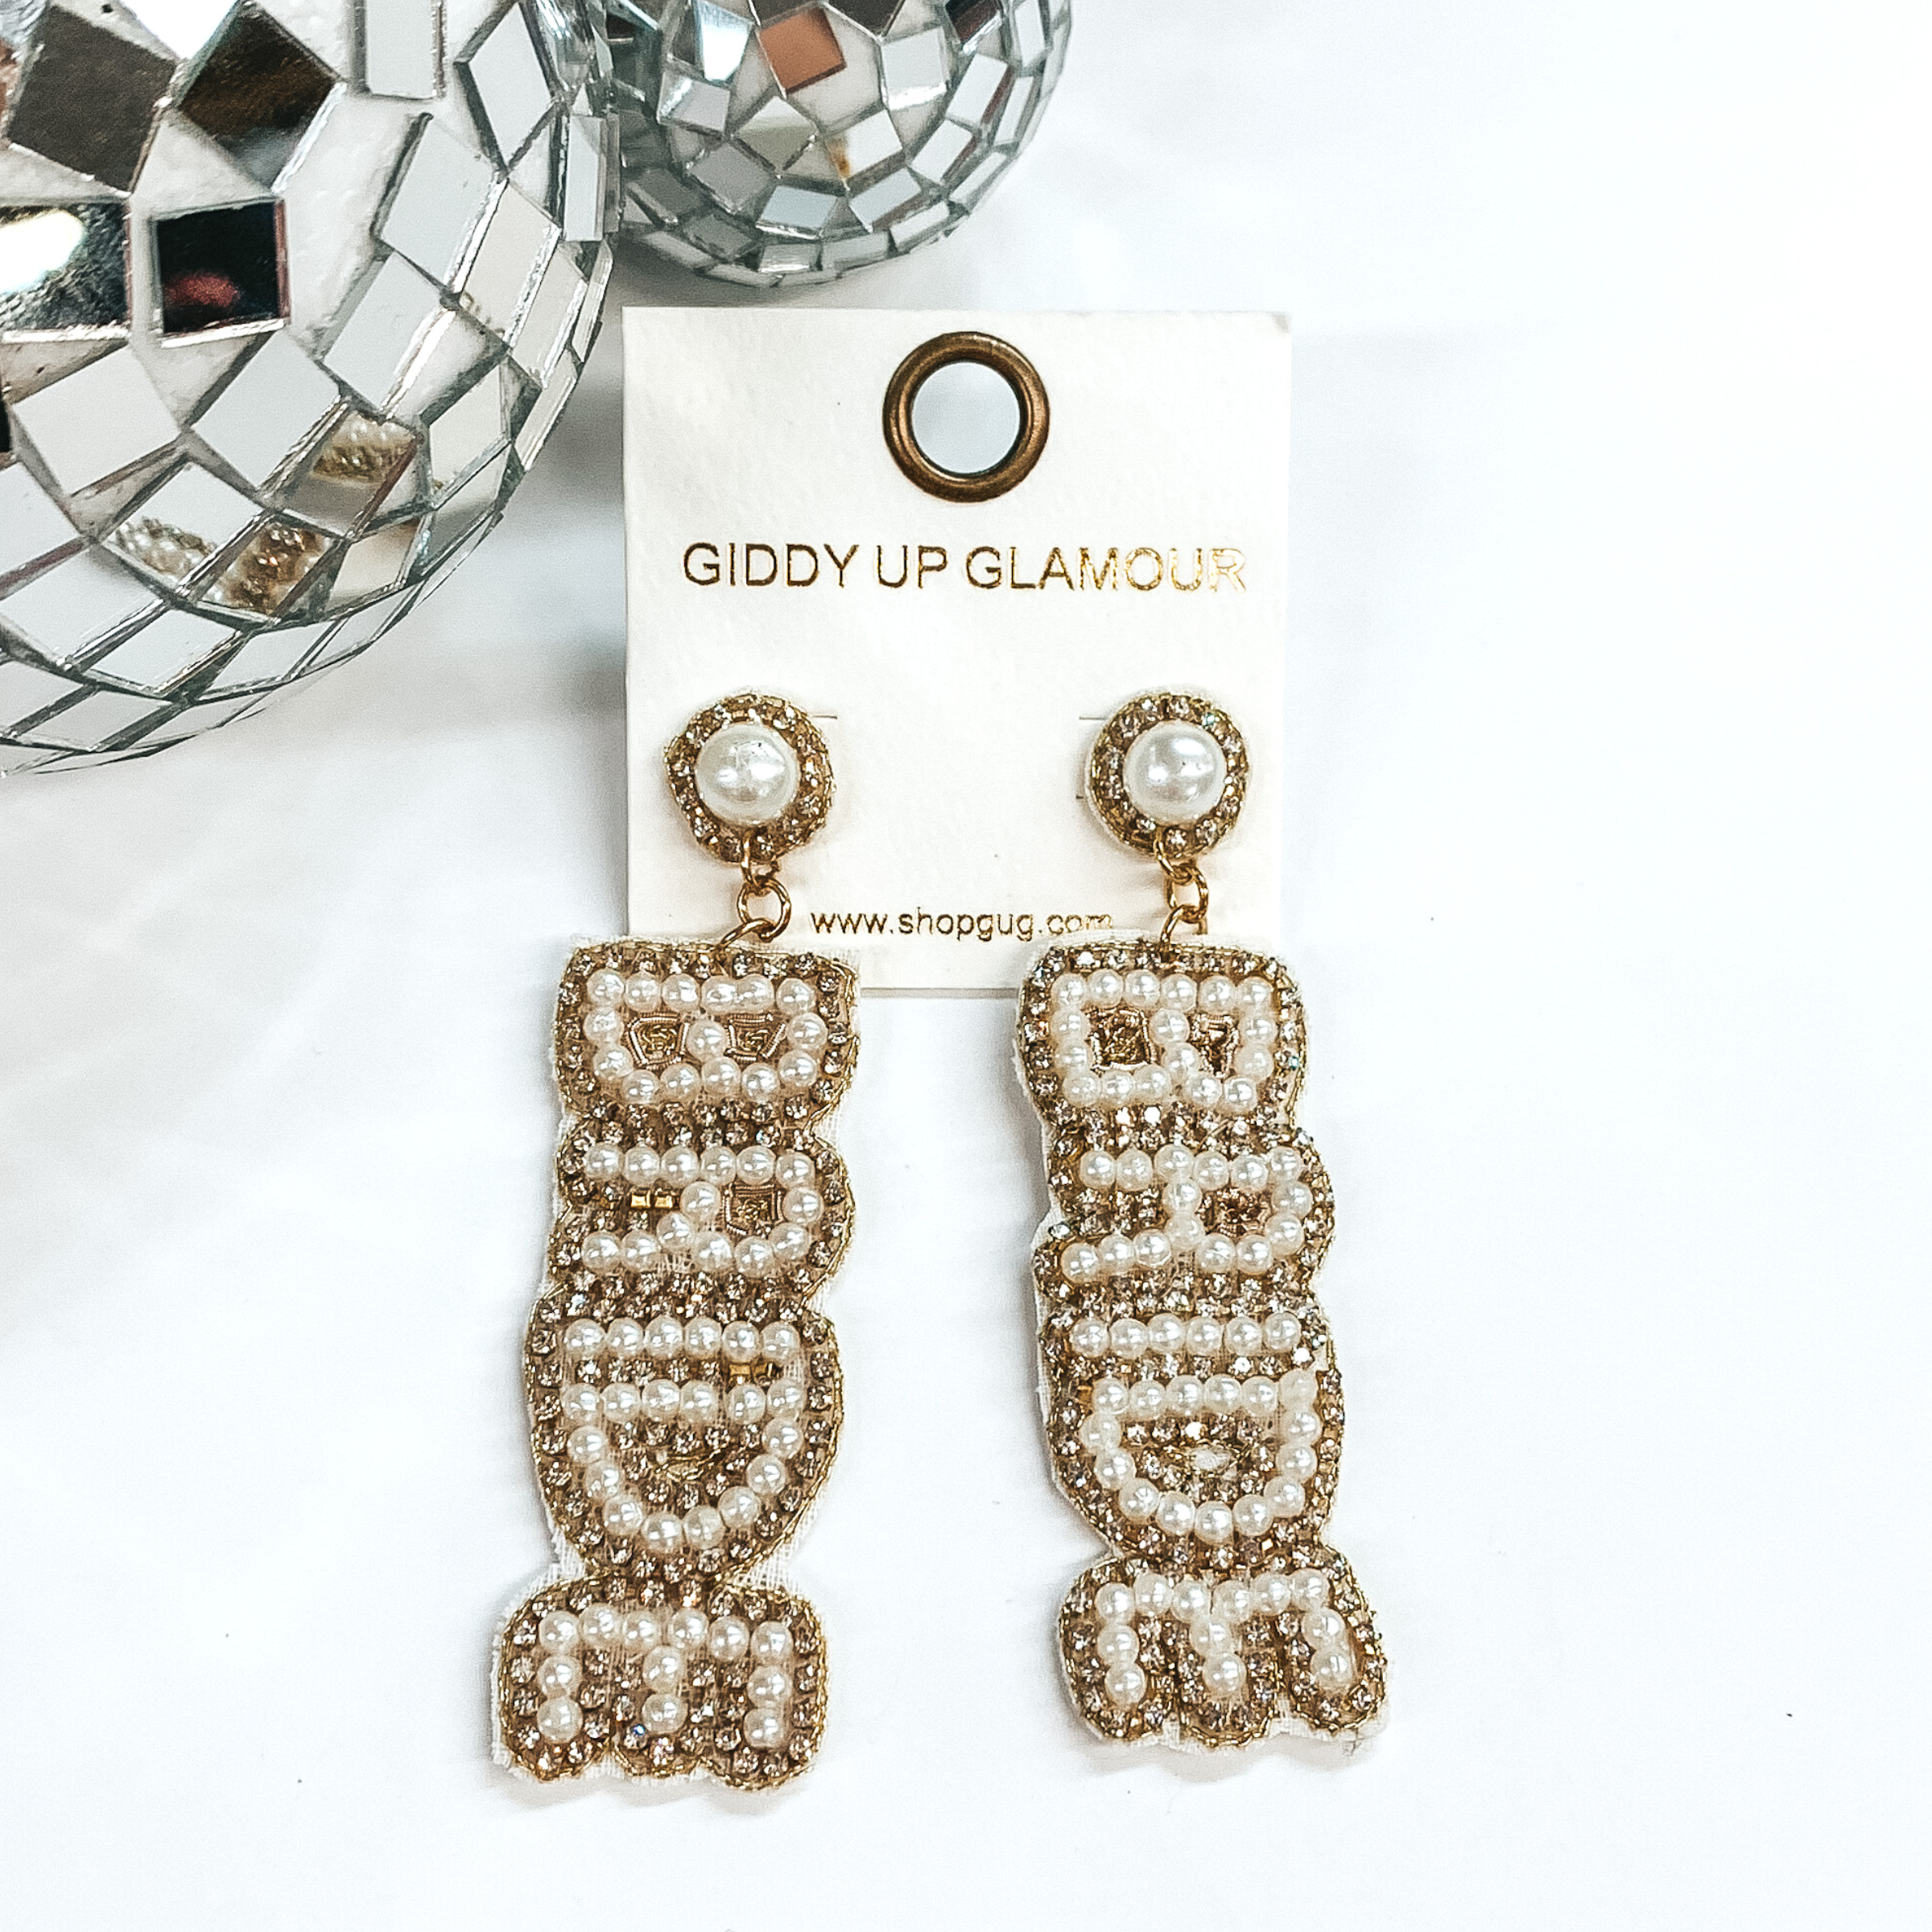 These earrings have pearl studs with a drop pendant with the word "BRIDE" spelled out in pearls. These earrings are also outline with clear crystals. This set of earrings are pictured on a white card holder on a white background with disco balls pictured on the top left corner. 